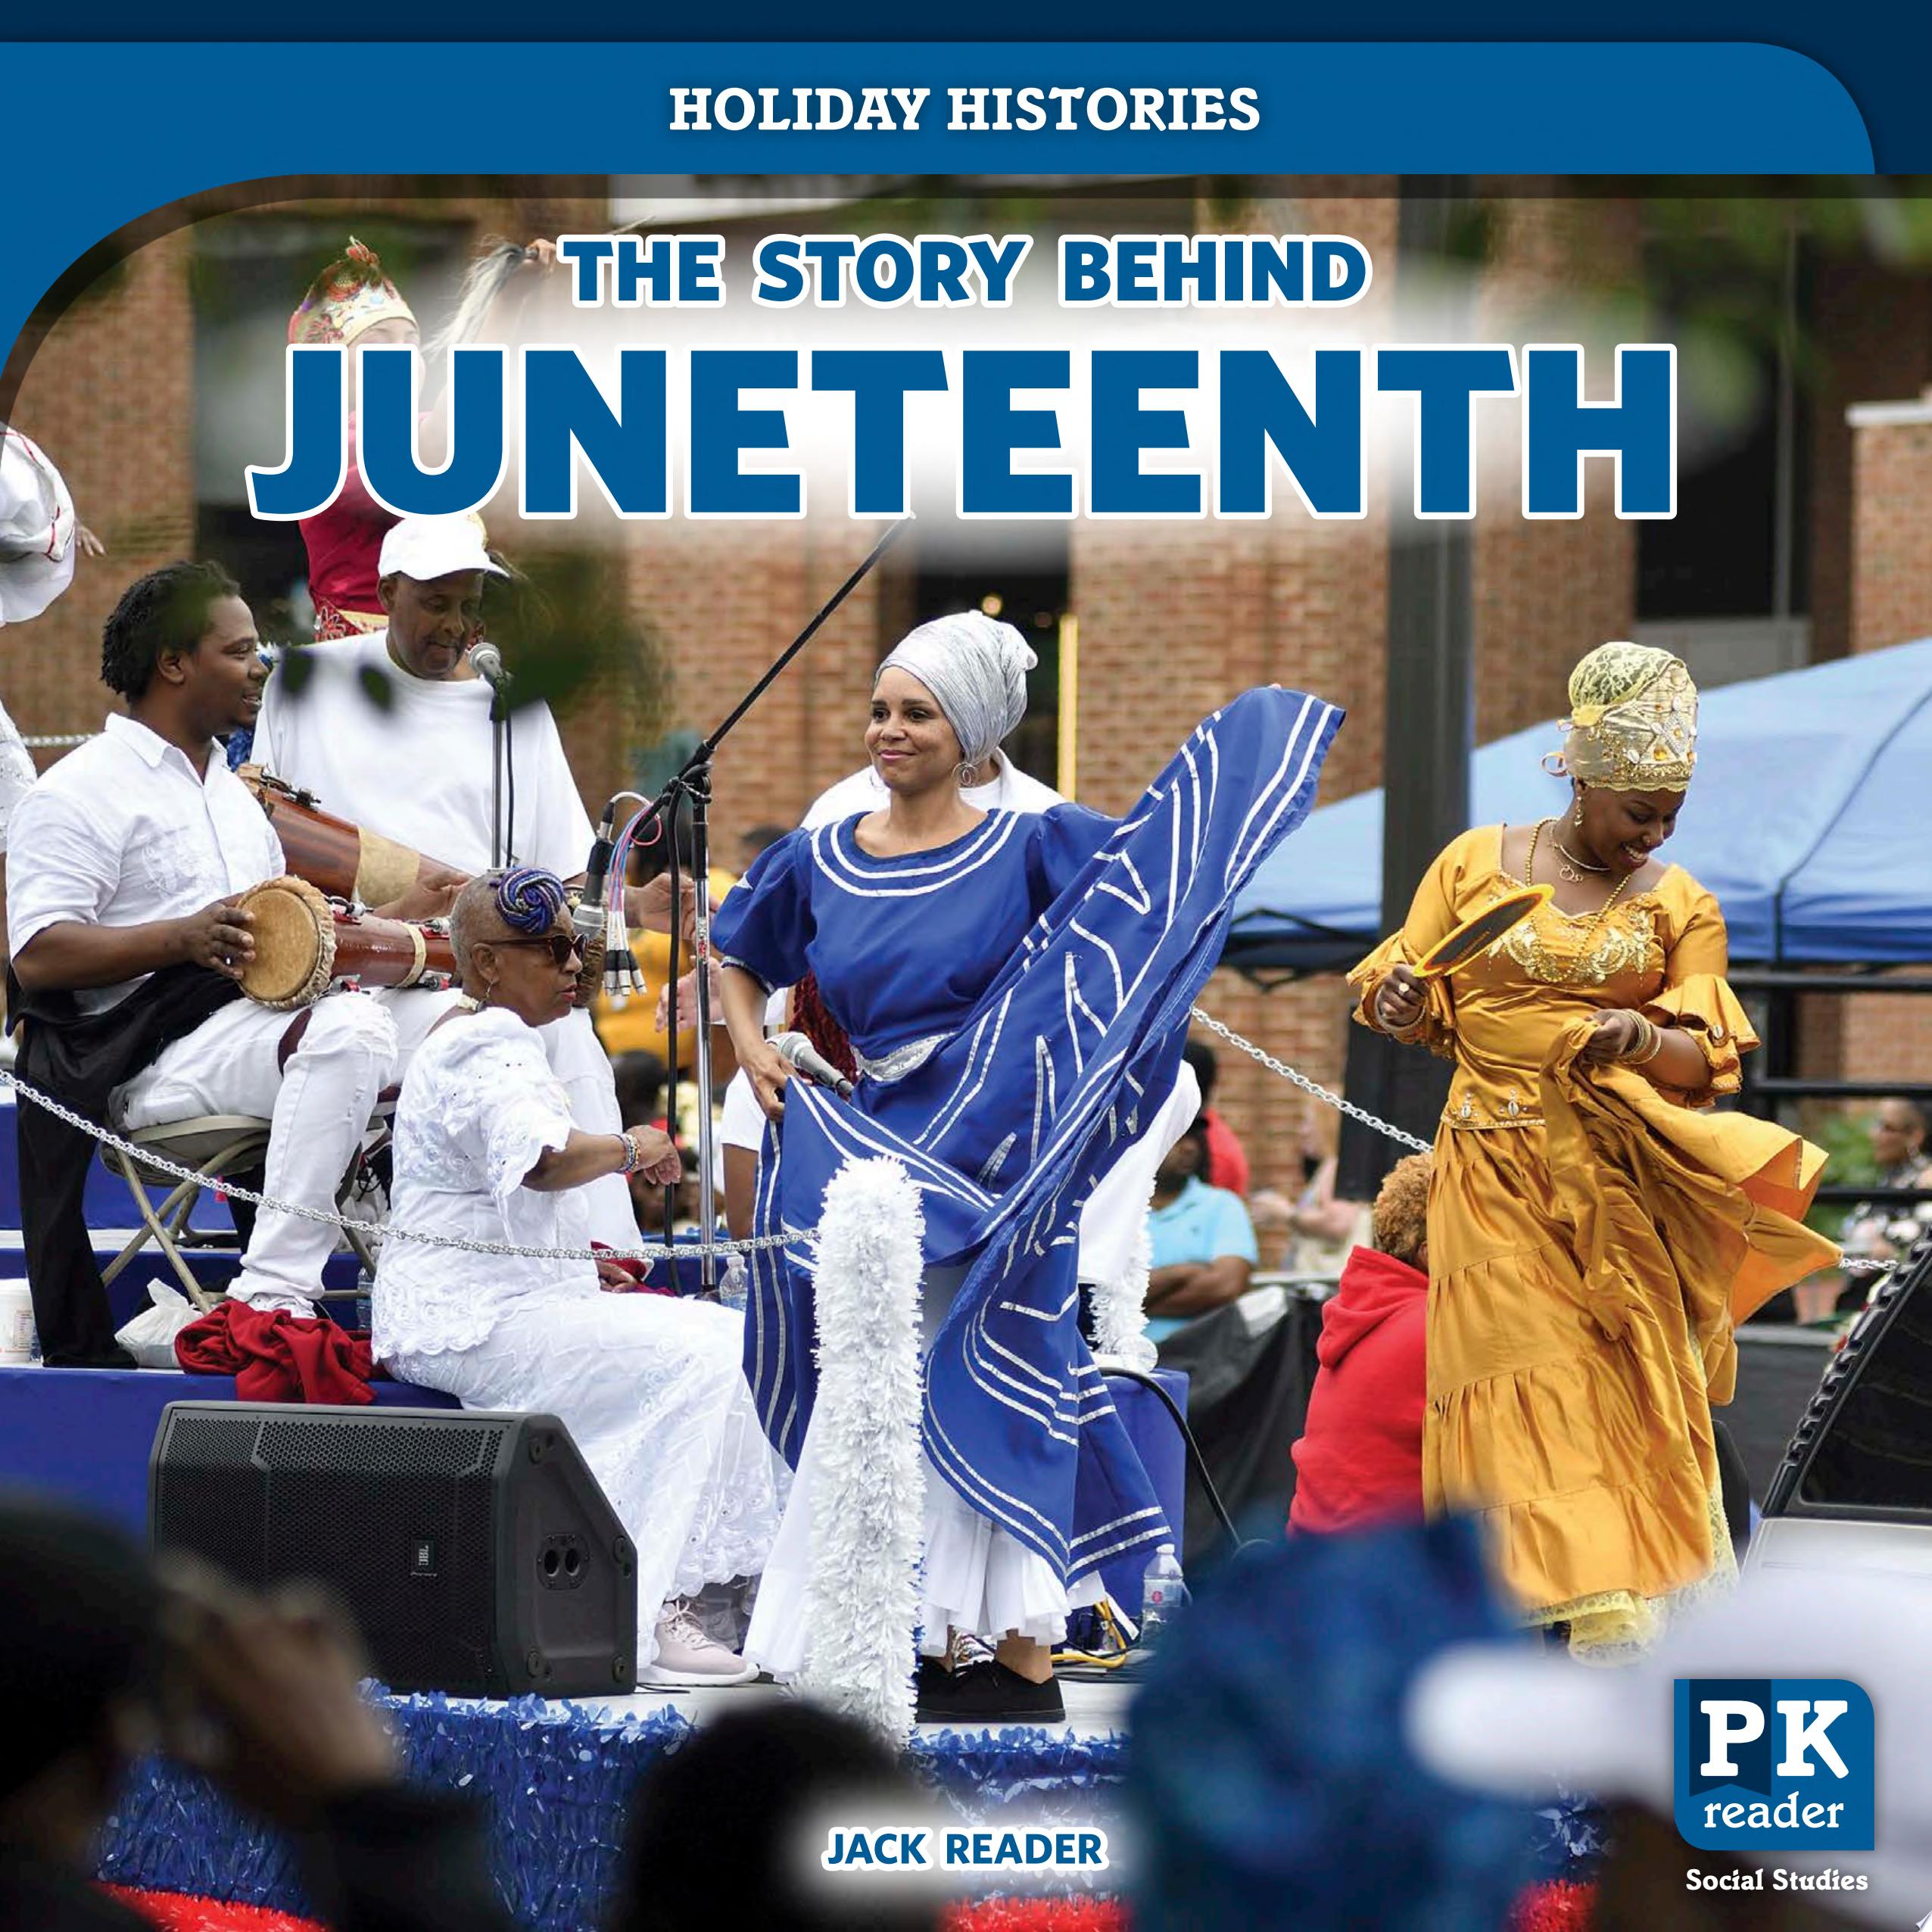 Image for "The Story Behind Juneteenth"